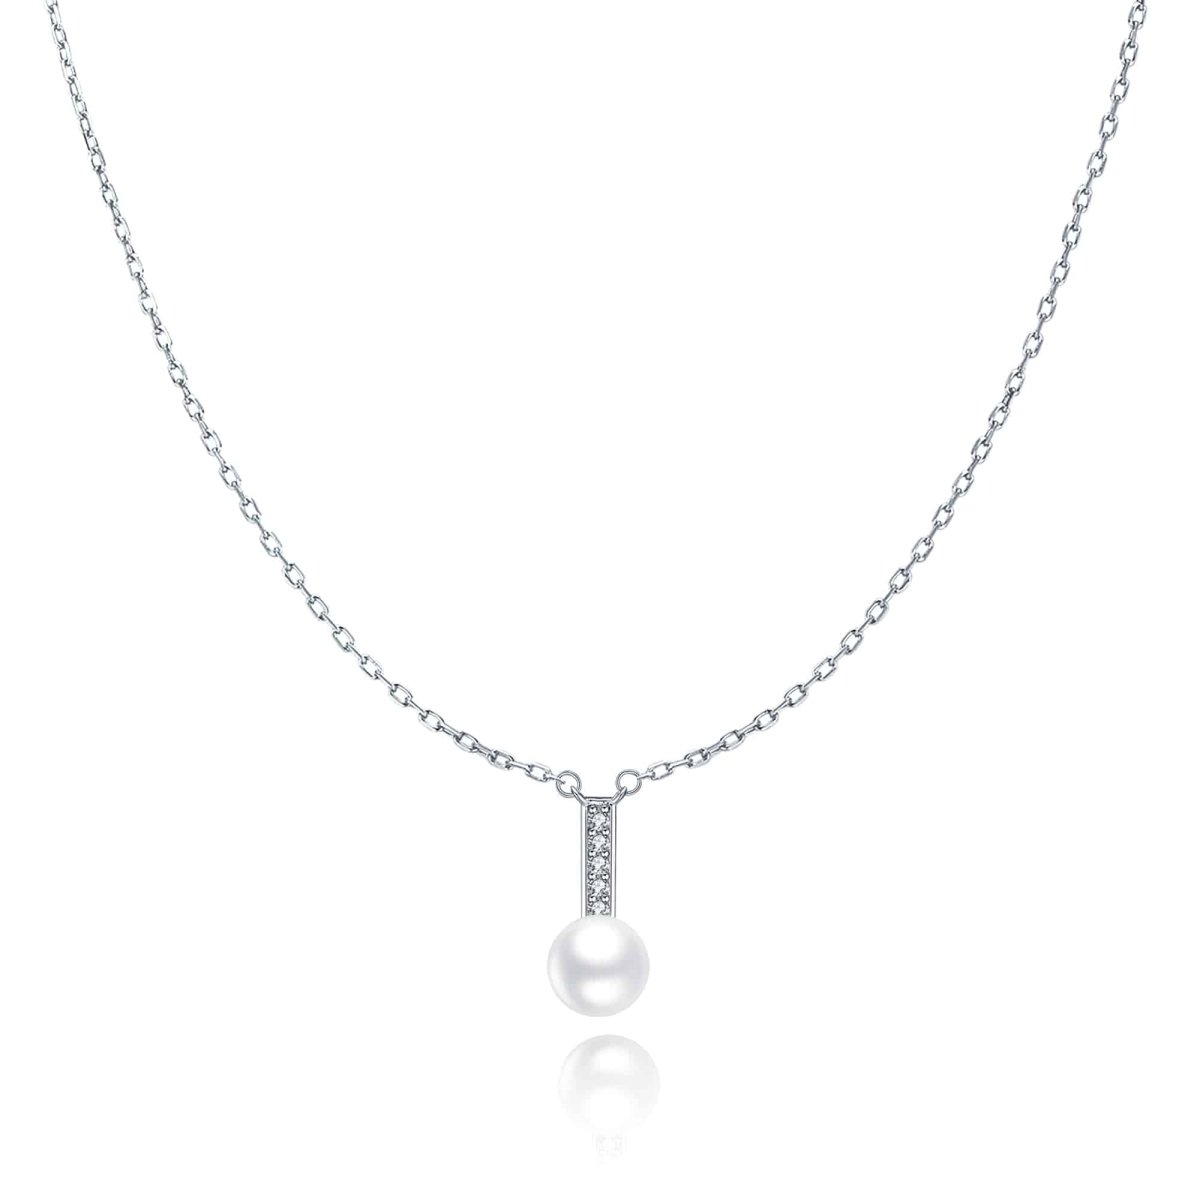 "Shining Pearl" Necklace - Milas Jewels Shop